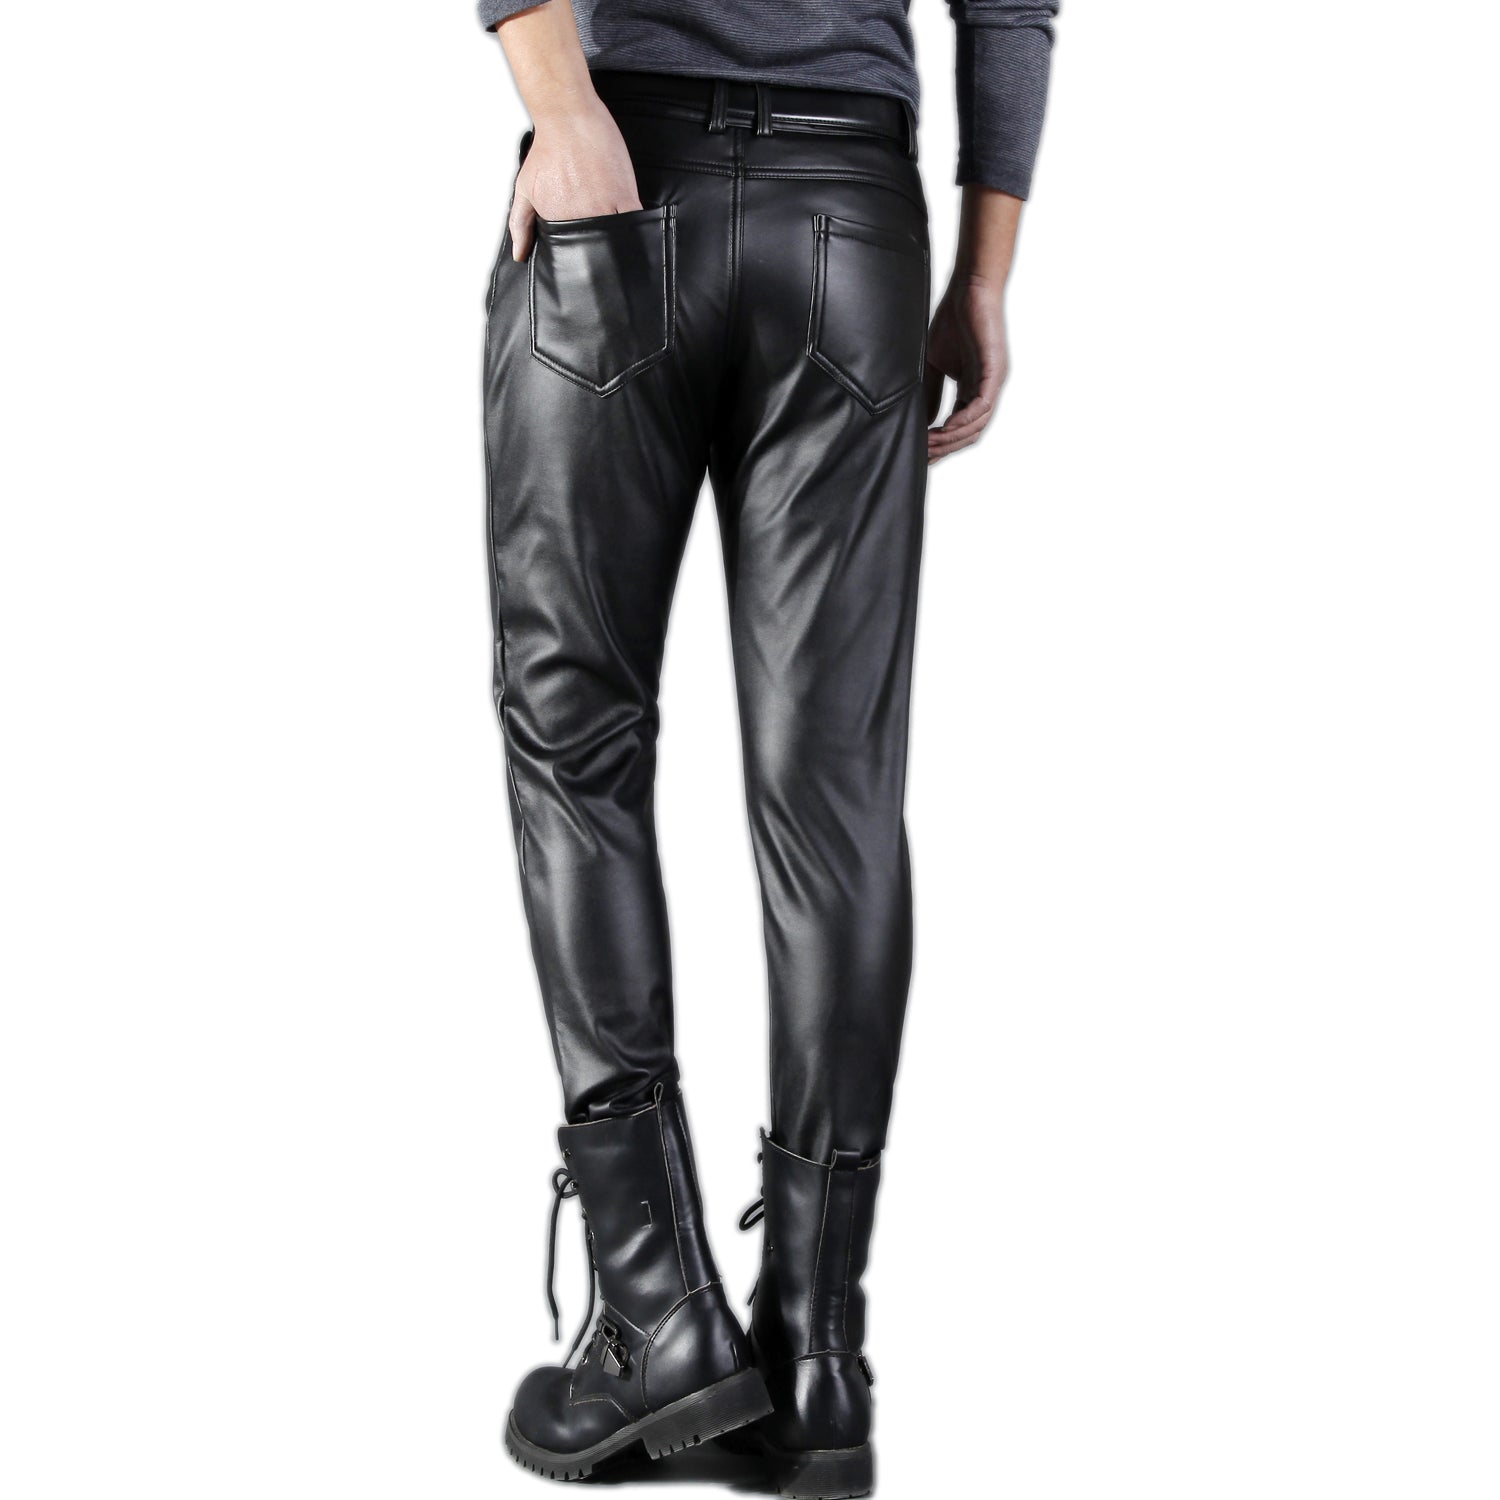 Leather Pants For Men / Spring & Summer Goth Pants / Alternative Fashion - HARD'N'HEAVY